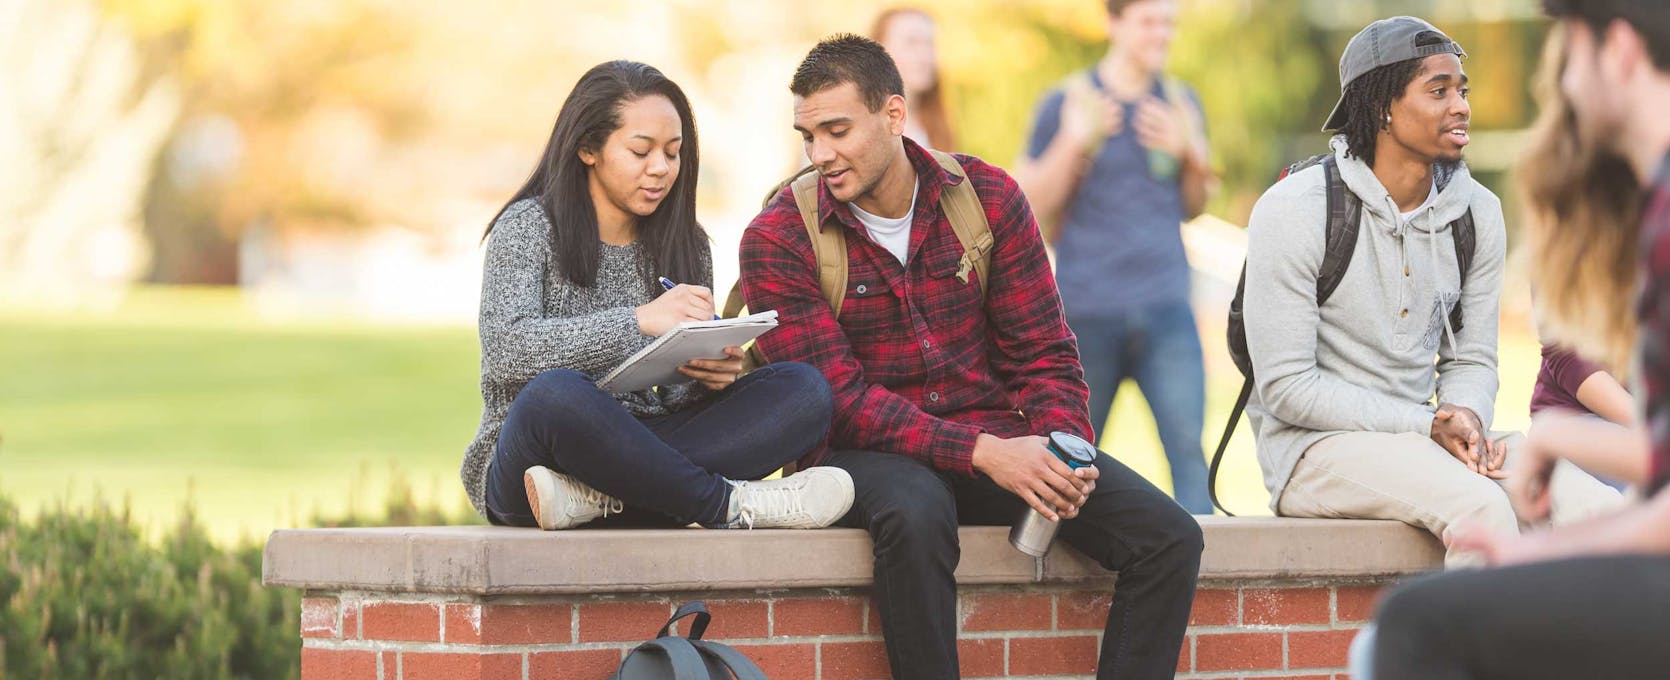 Students review schedules on campus